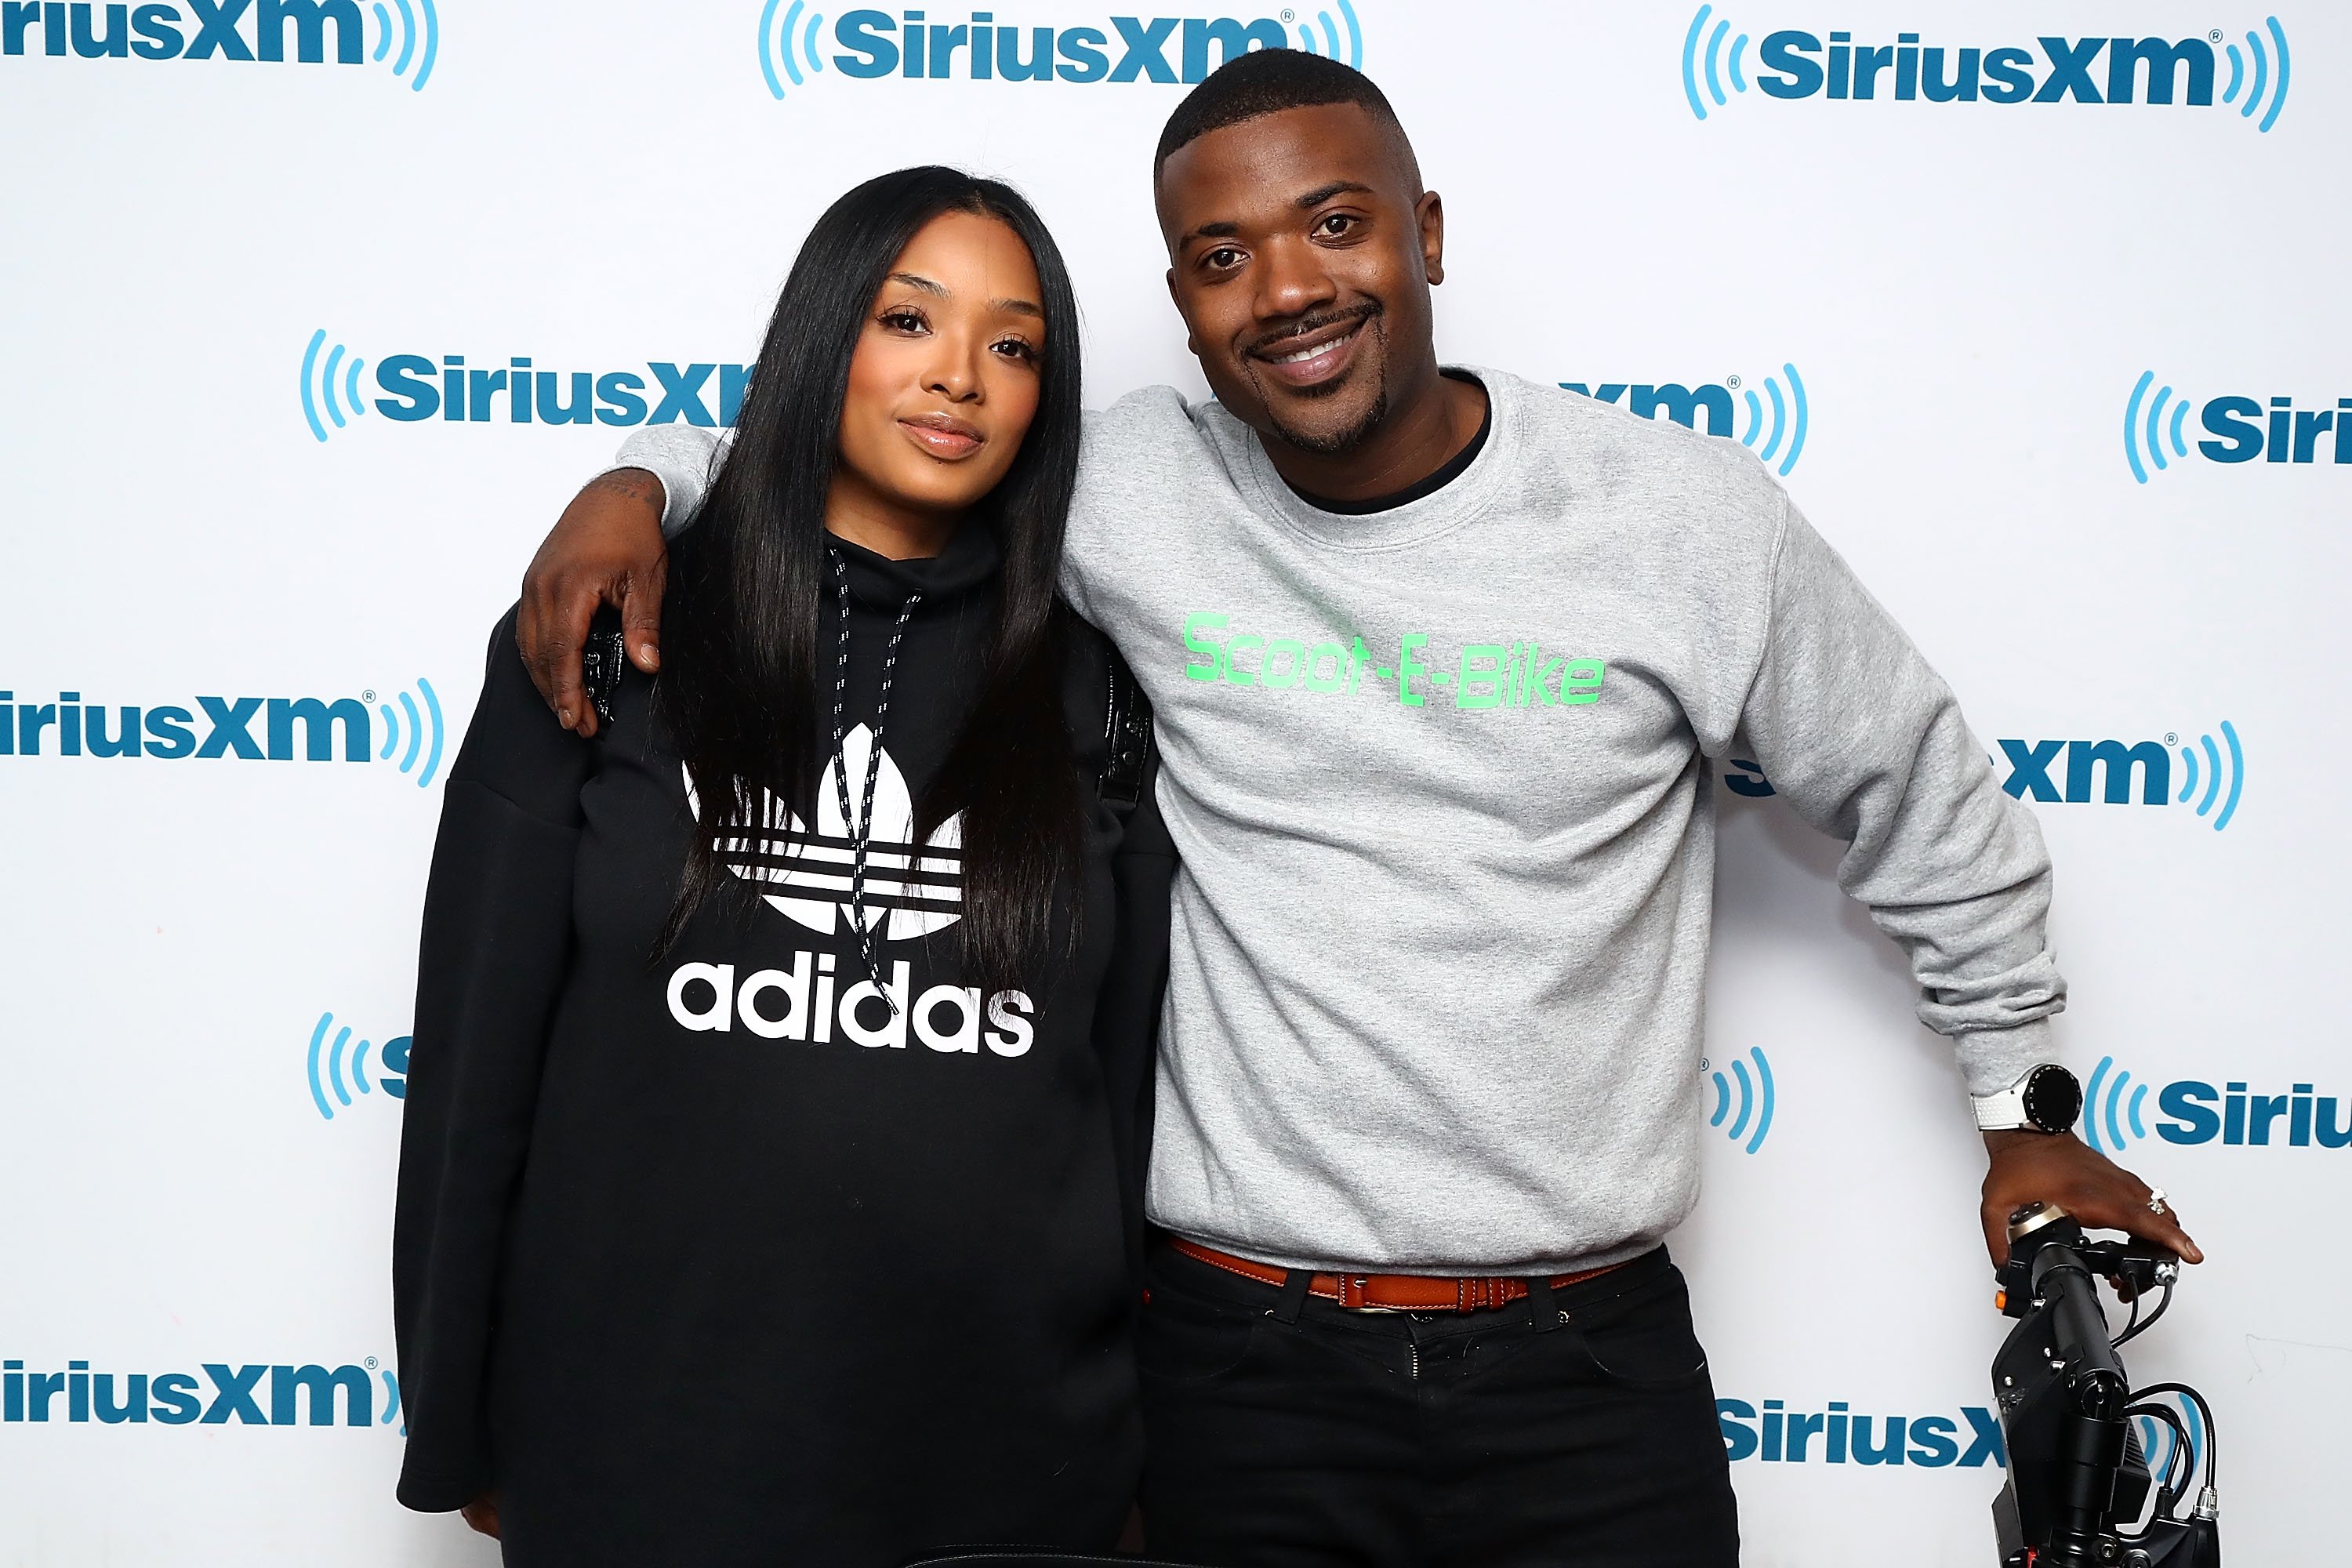 Princess Love and Ray J visit the SiriusXM Studios on March 29, 2018 in New York City | Photo: Getty Images